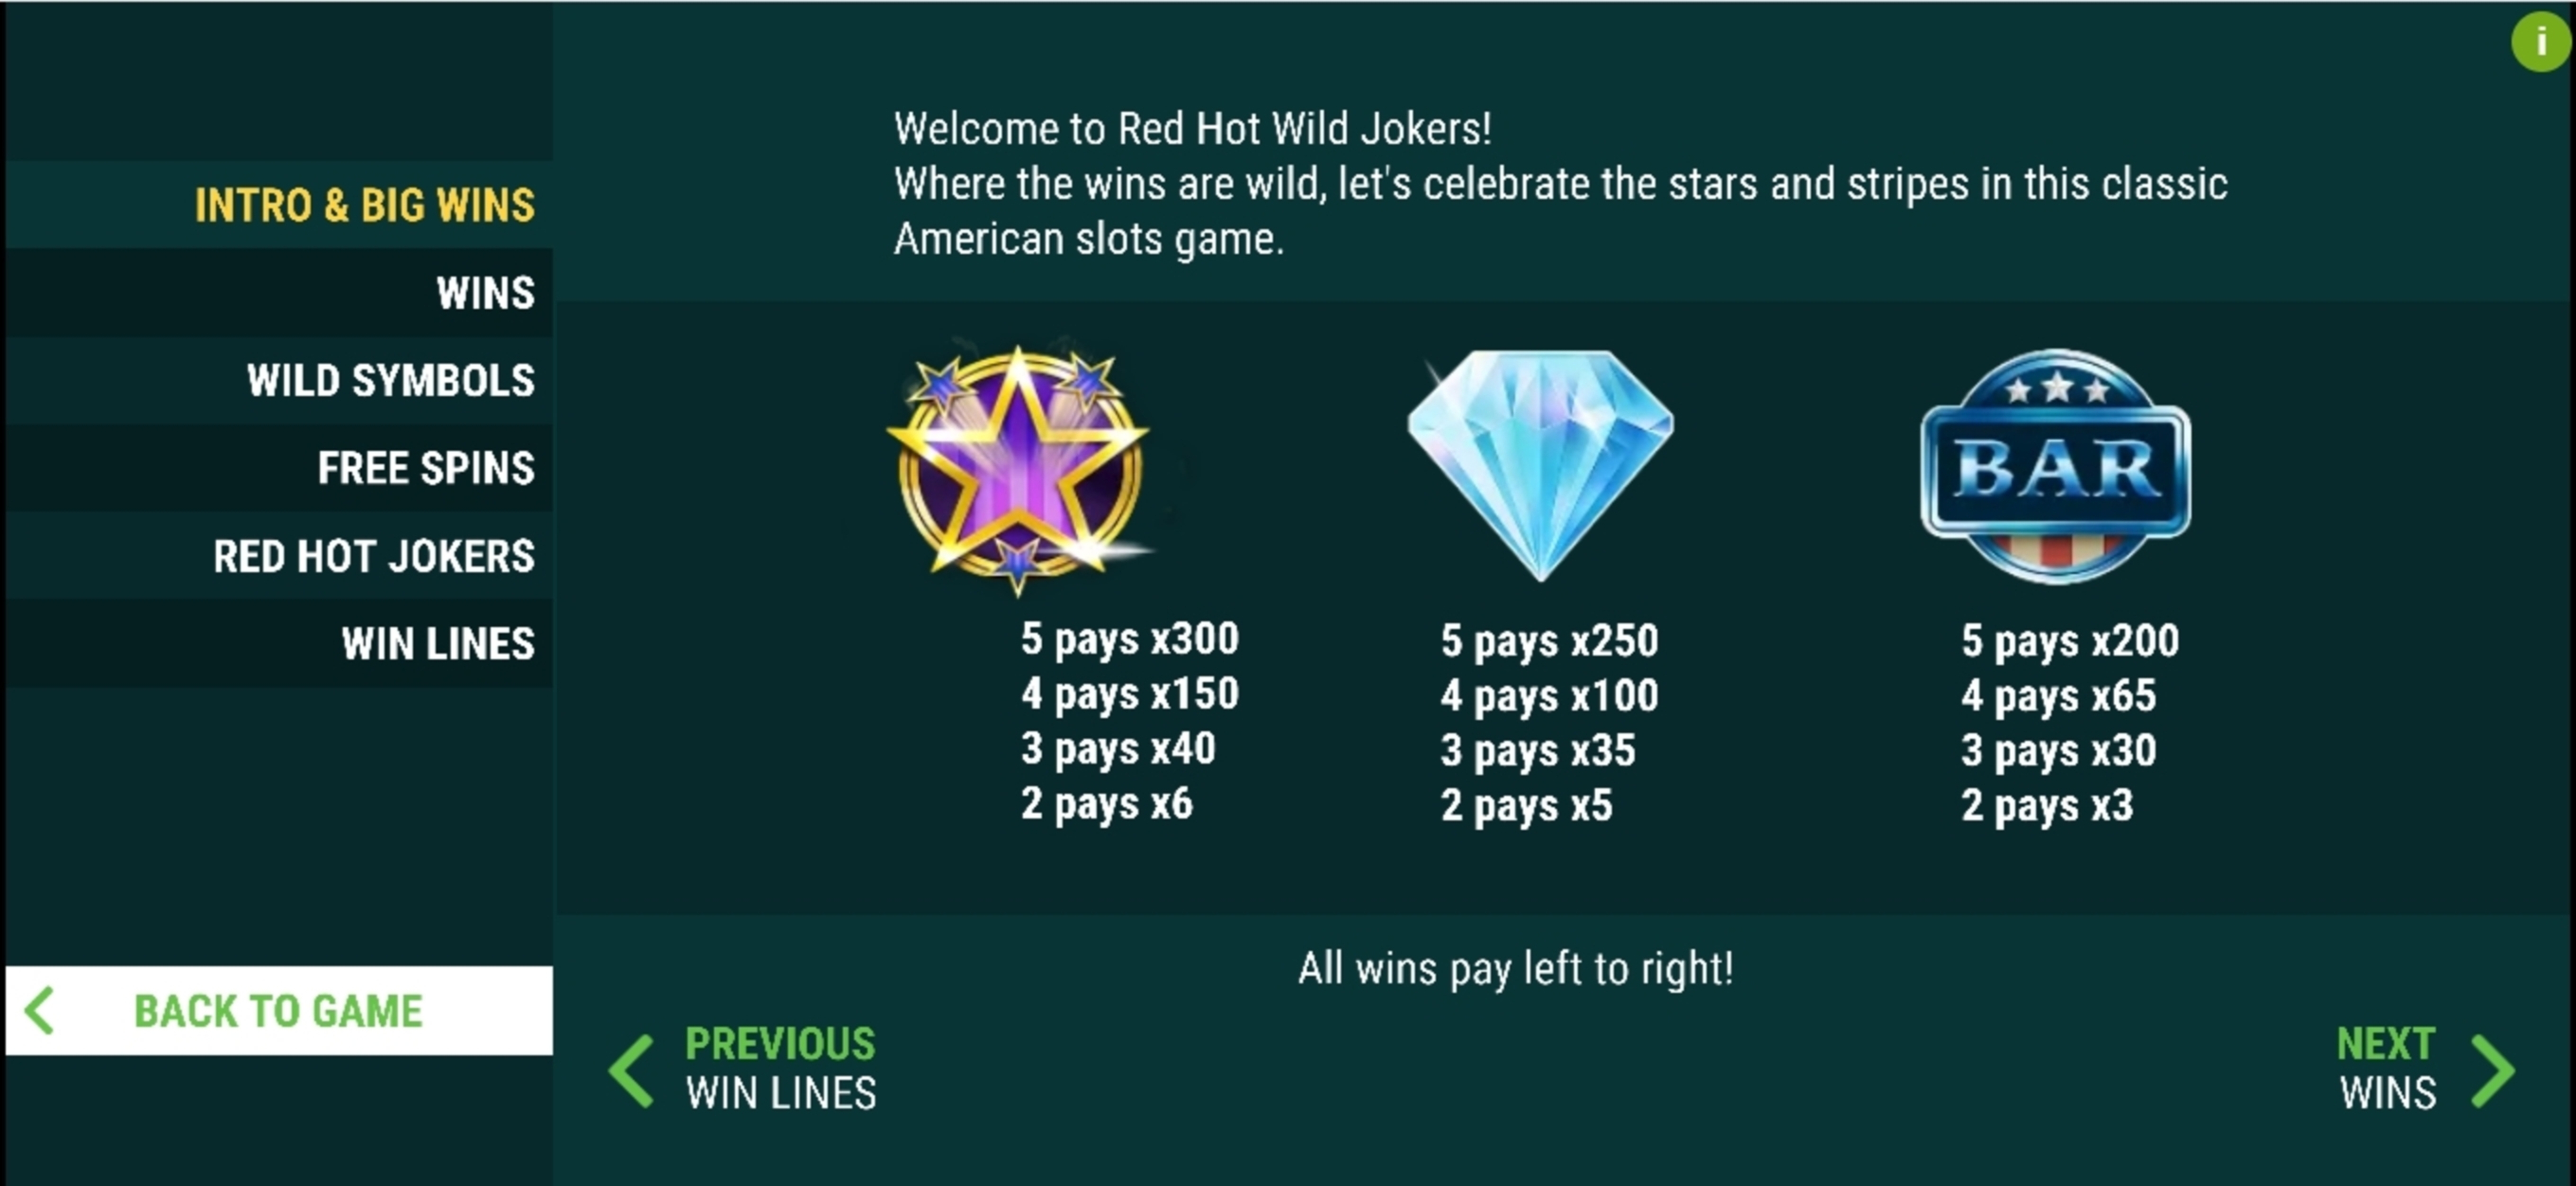 Info of Red Hot Wild Jokers Slot Game by Slot Factory